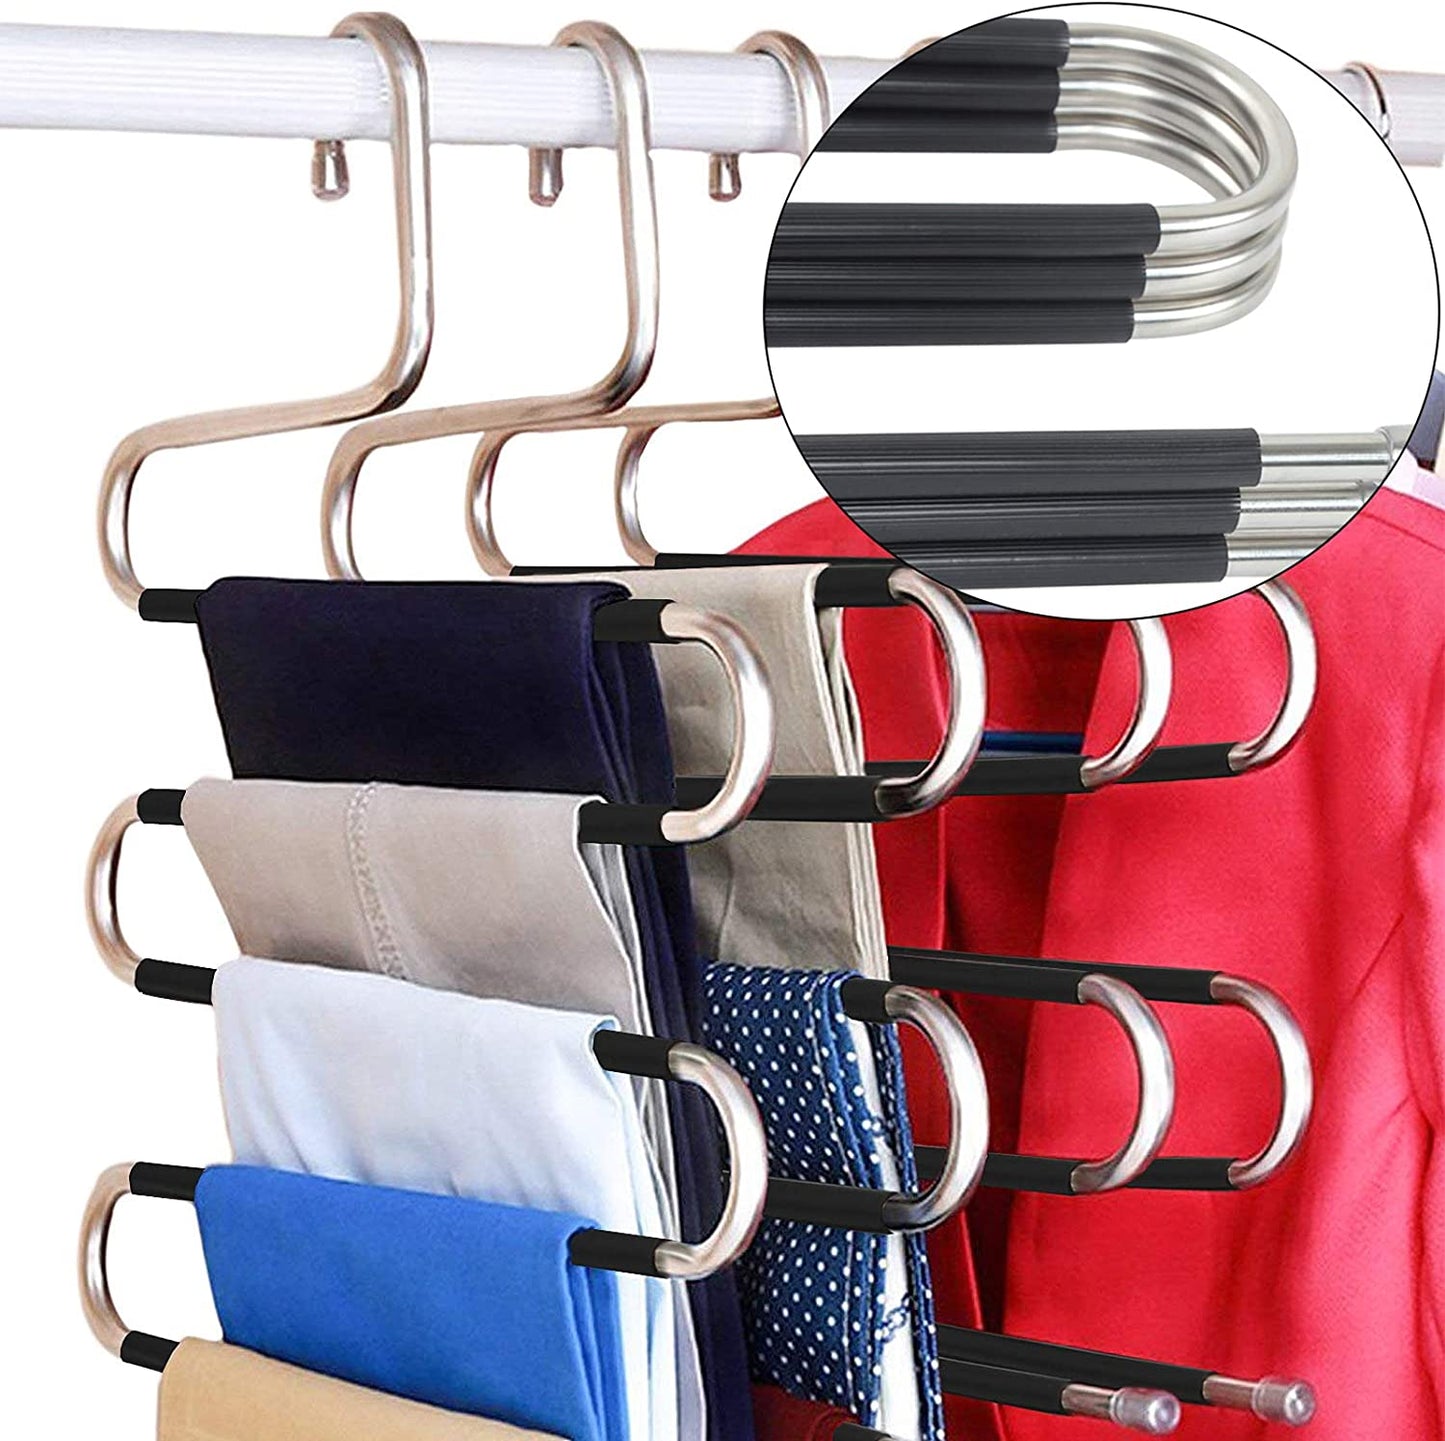 New Pants Clothes Hangers 5 Pieces Non Slip Space Saving Hangers Stainless Steel Clothes Hangers Closet Organizer for Pants Jeans Scarf(Upgrade Style)